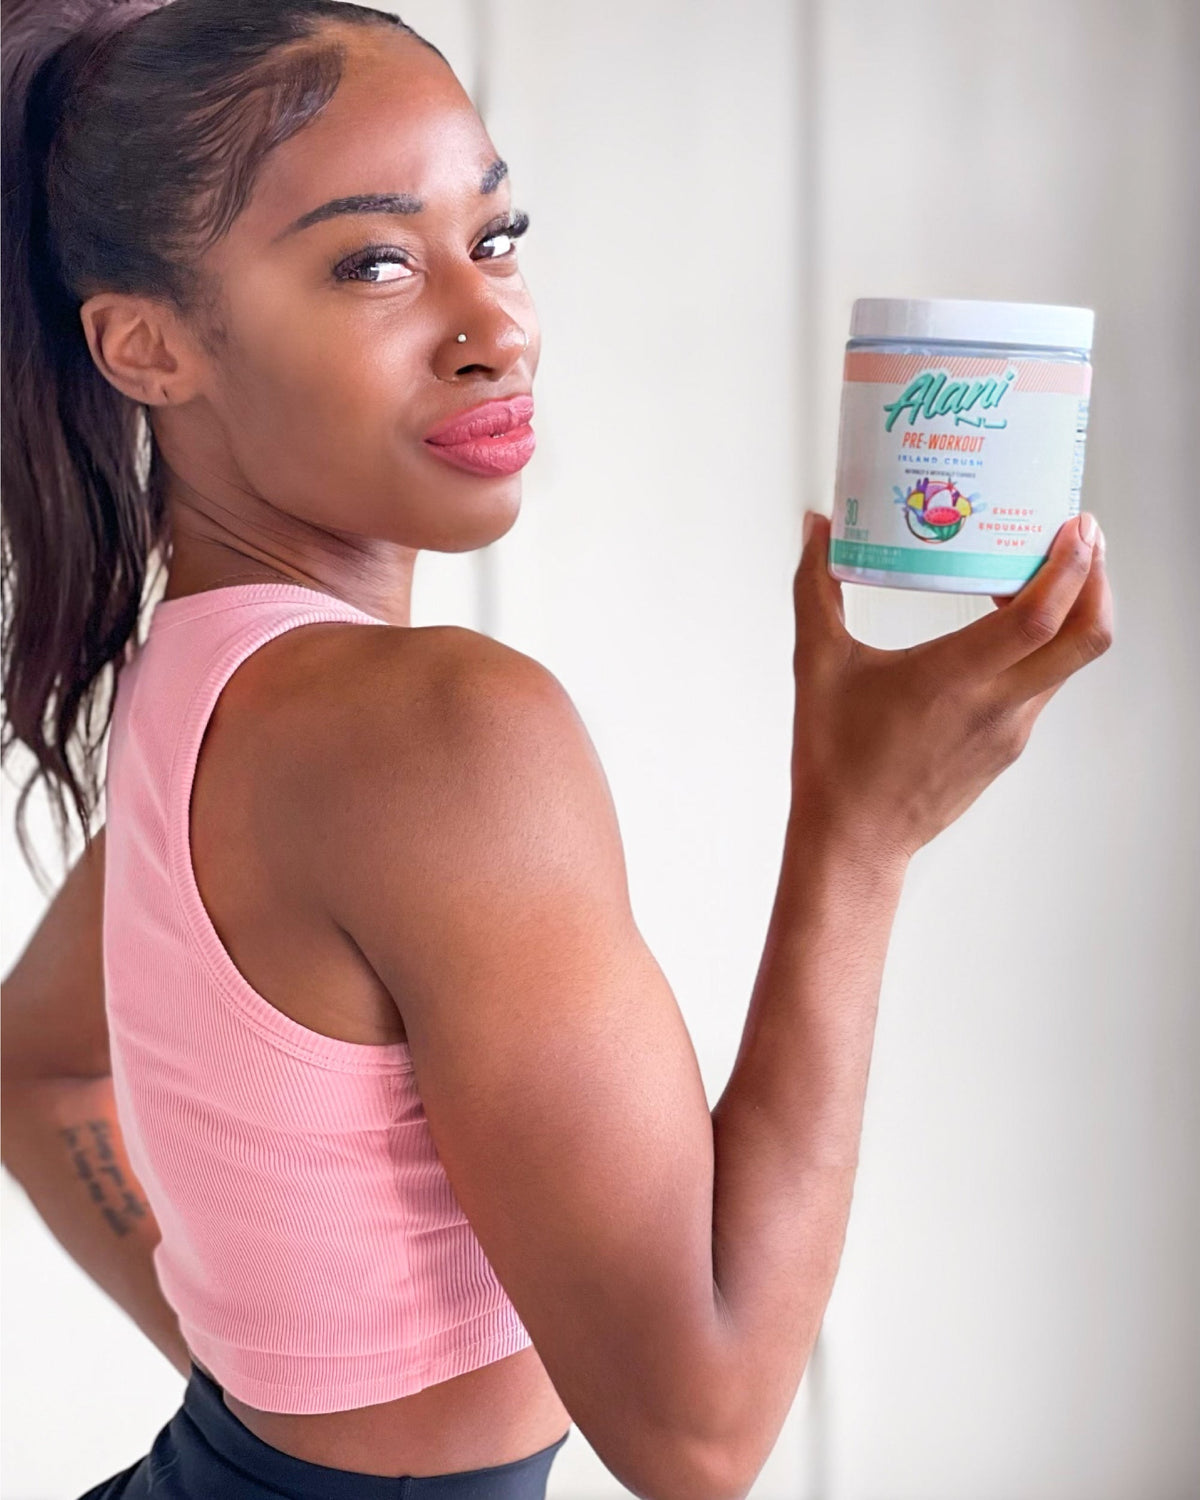 A woman in a pink top holding a container  of Alani Nu Pre-Workout - Island Crush powder.